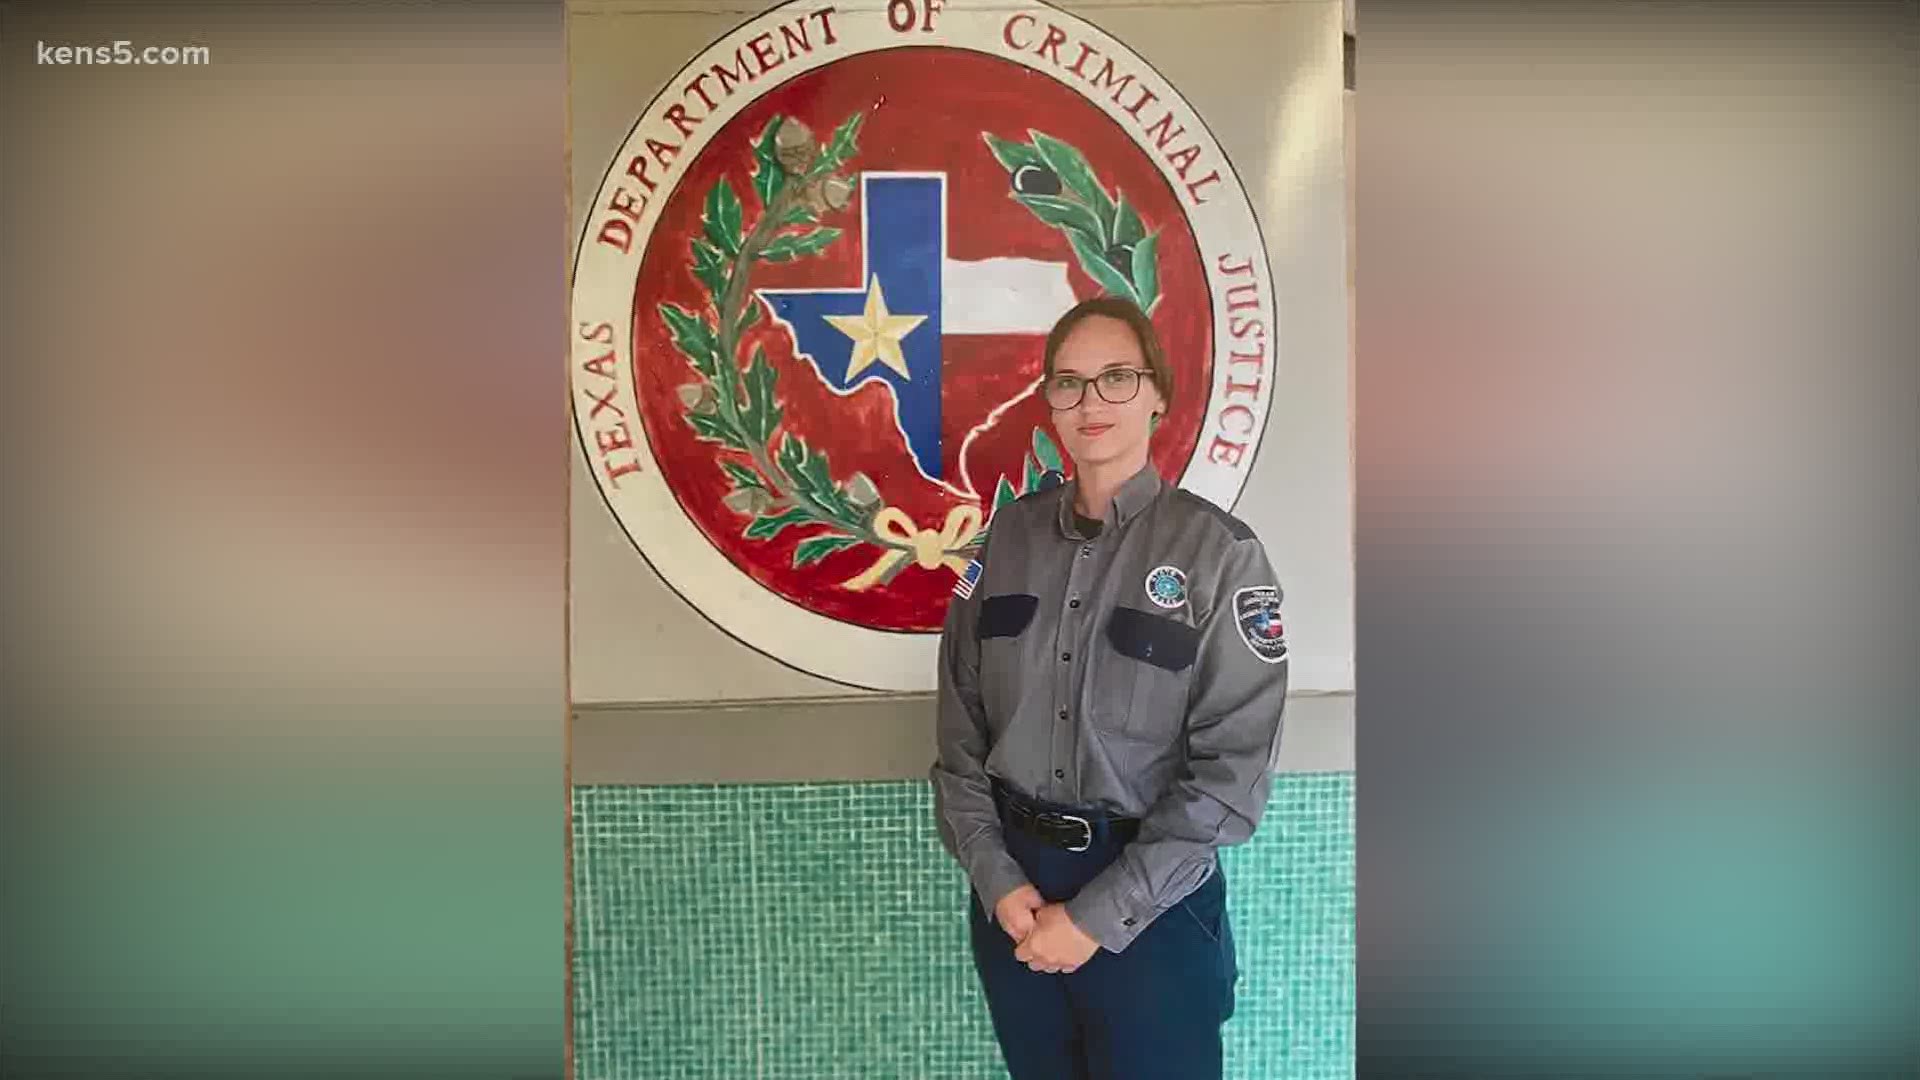 At a news conference Tuesday, Sheriff Salazar said a woman killed in a stabbing on Sunday had just graduated from the academy.